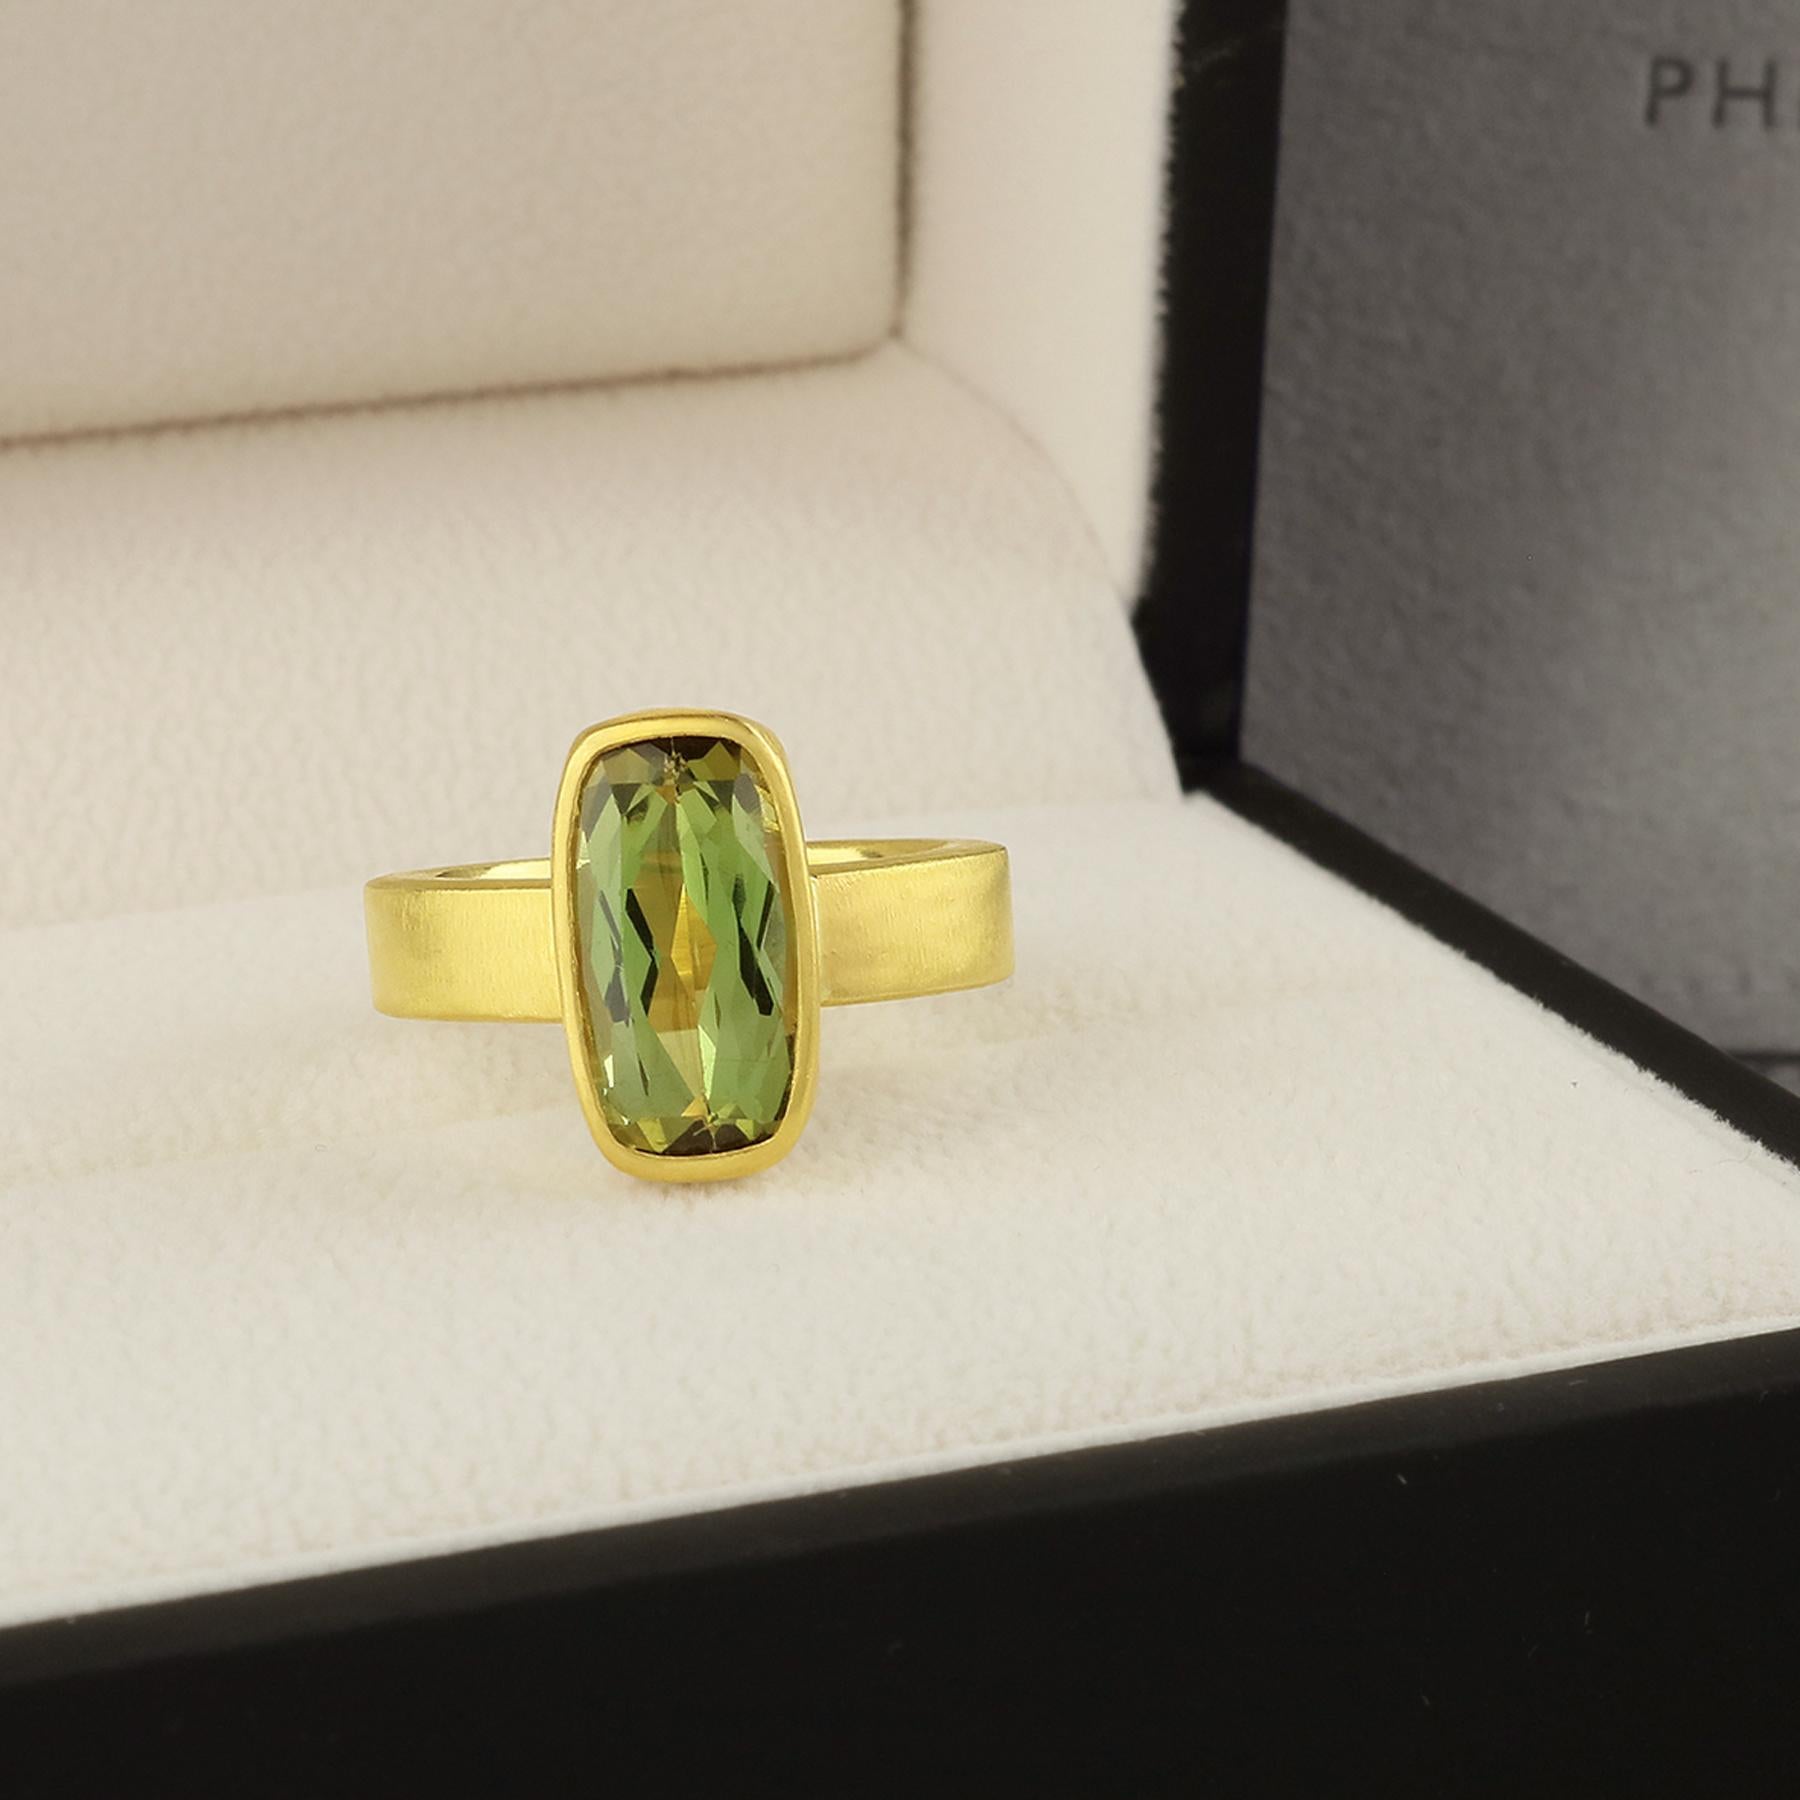 PHILIPPE SPENCER - 5.17 Ct. Faceted Olive Tourmaline wrapped in backless 22K Gold setting with Solid 20K Gold Hand & Anvil-Forged Statement Ring.  Heavy Brushed Exterior, Mirror Polish Interior Finish.   Size 7  1/2, and is in-stock and ready to